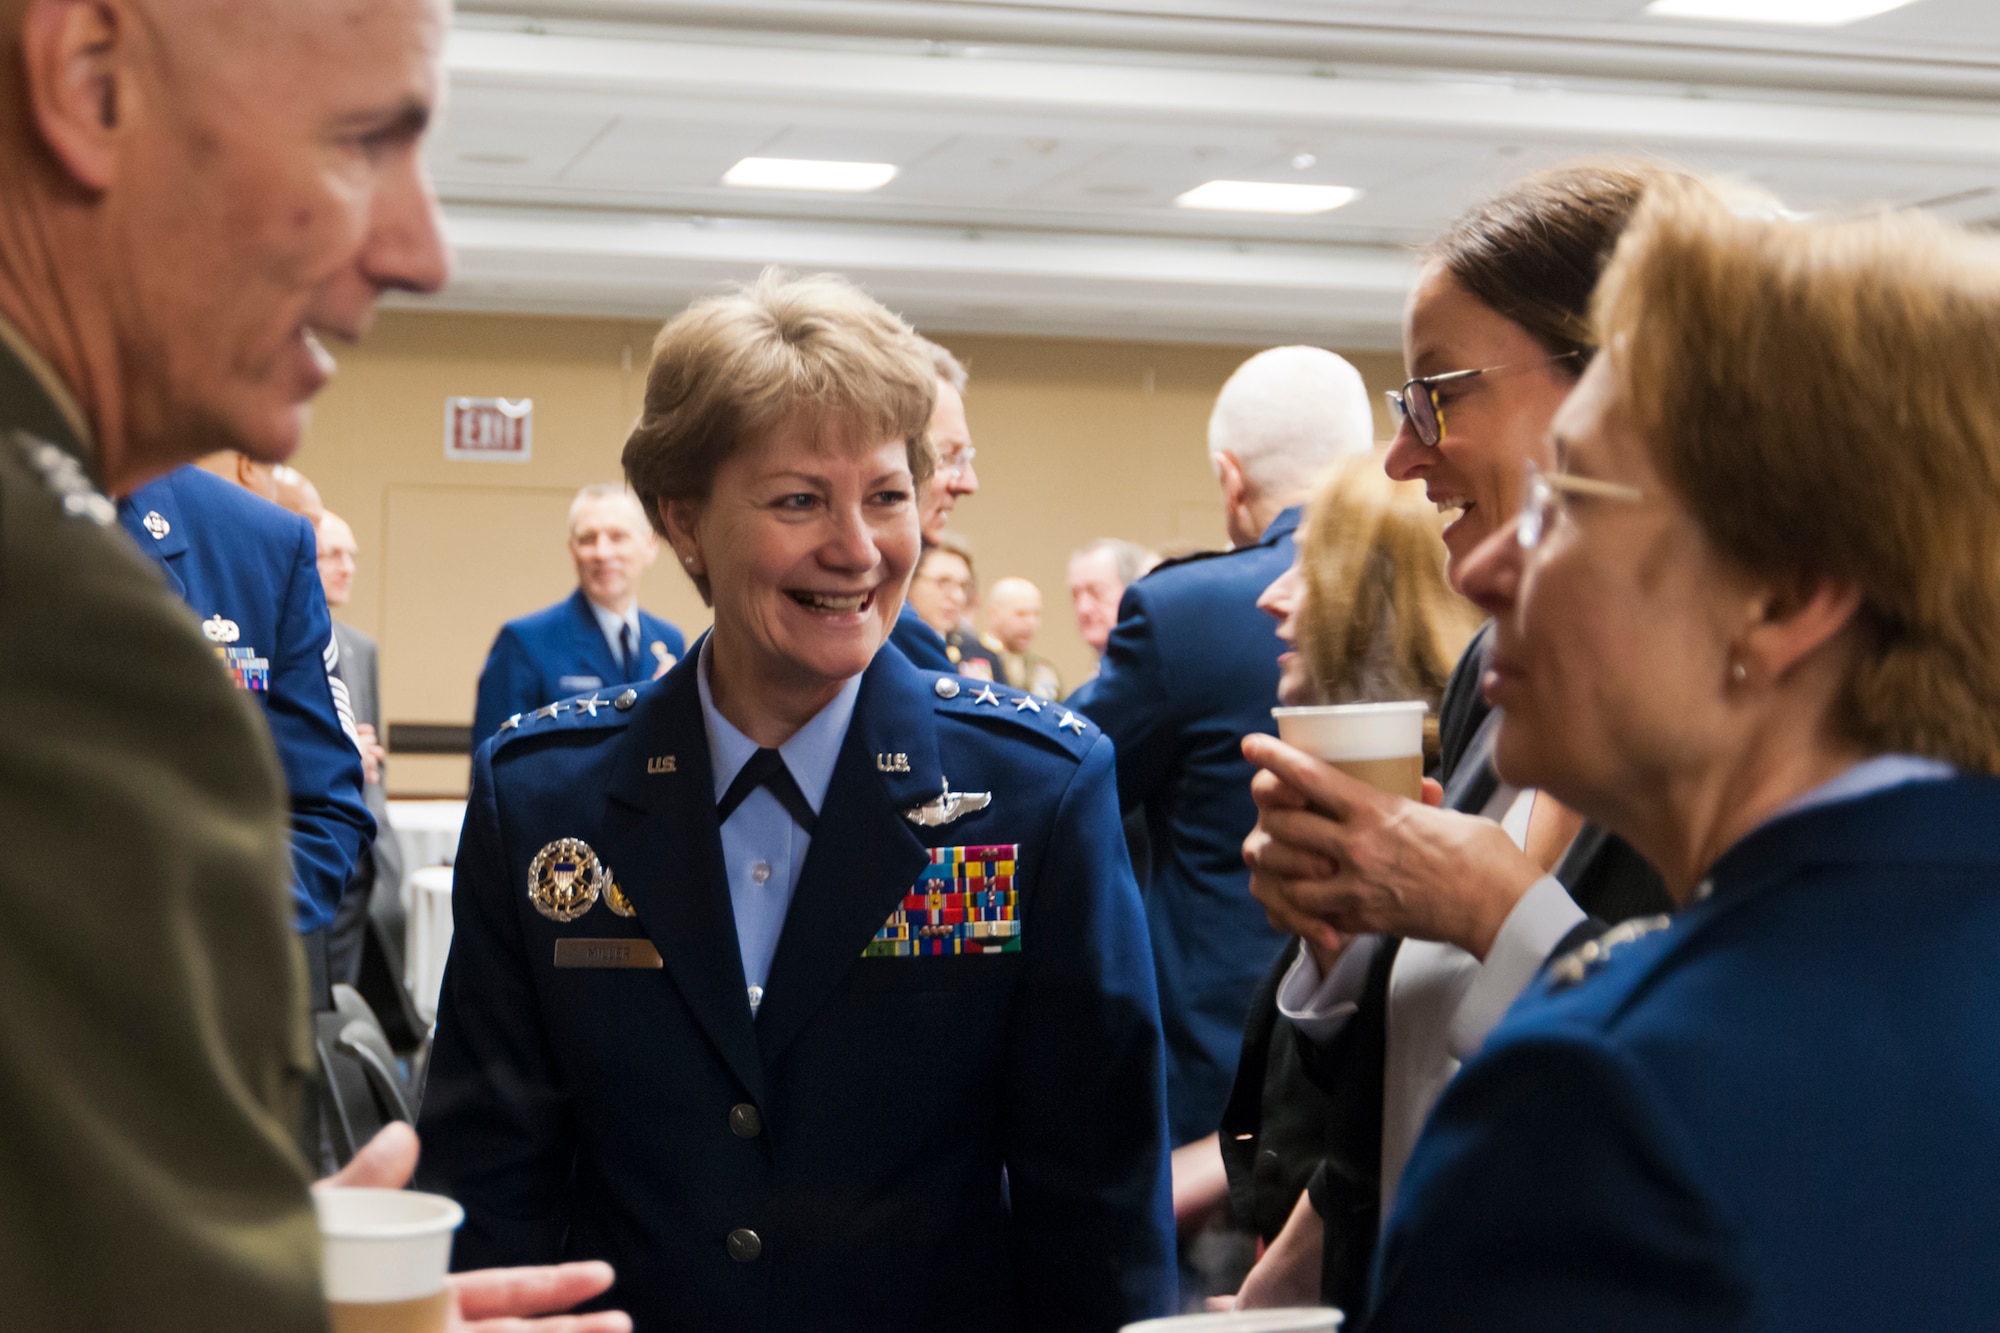 Lt. Gen. Maryanne Miller, the chief of Air Force Reserve and commander, Air Force Reserve Command, discusses her top priorities for the Air Force Reserve during the House National Guard and Reserve Caucus breakfast on Capitol Hill, March 8.  The event featured service chiefs from the Reserve and Guard components and members of Congress. The NGRCC advocates
legislative and policy initiatives for National Guard and Reserve. (U.S. Air Force photo/Tech. Sgt. Kat Justen)
